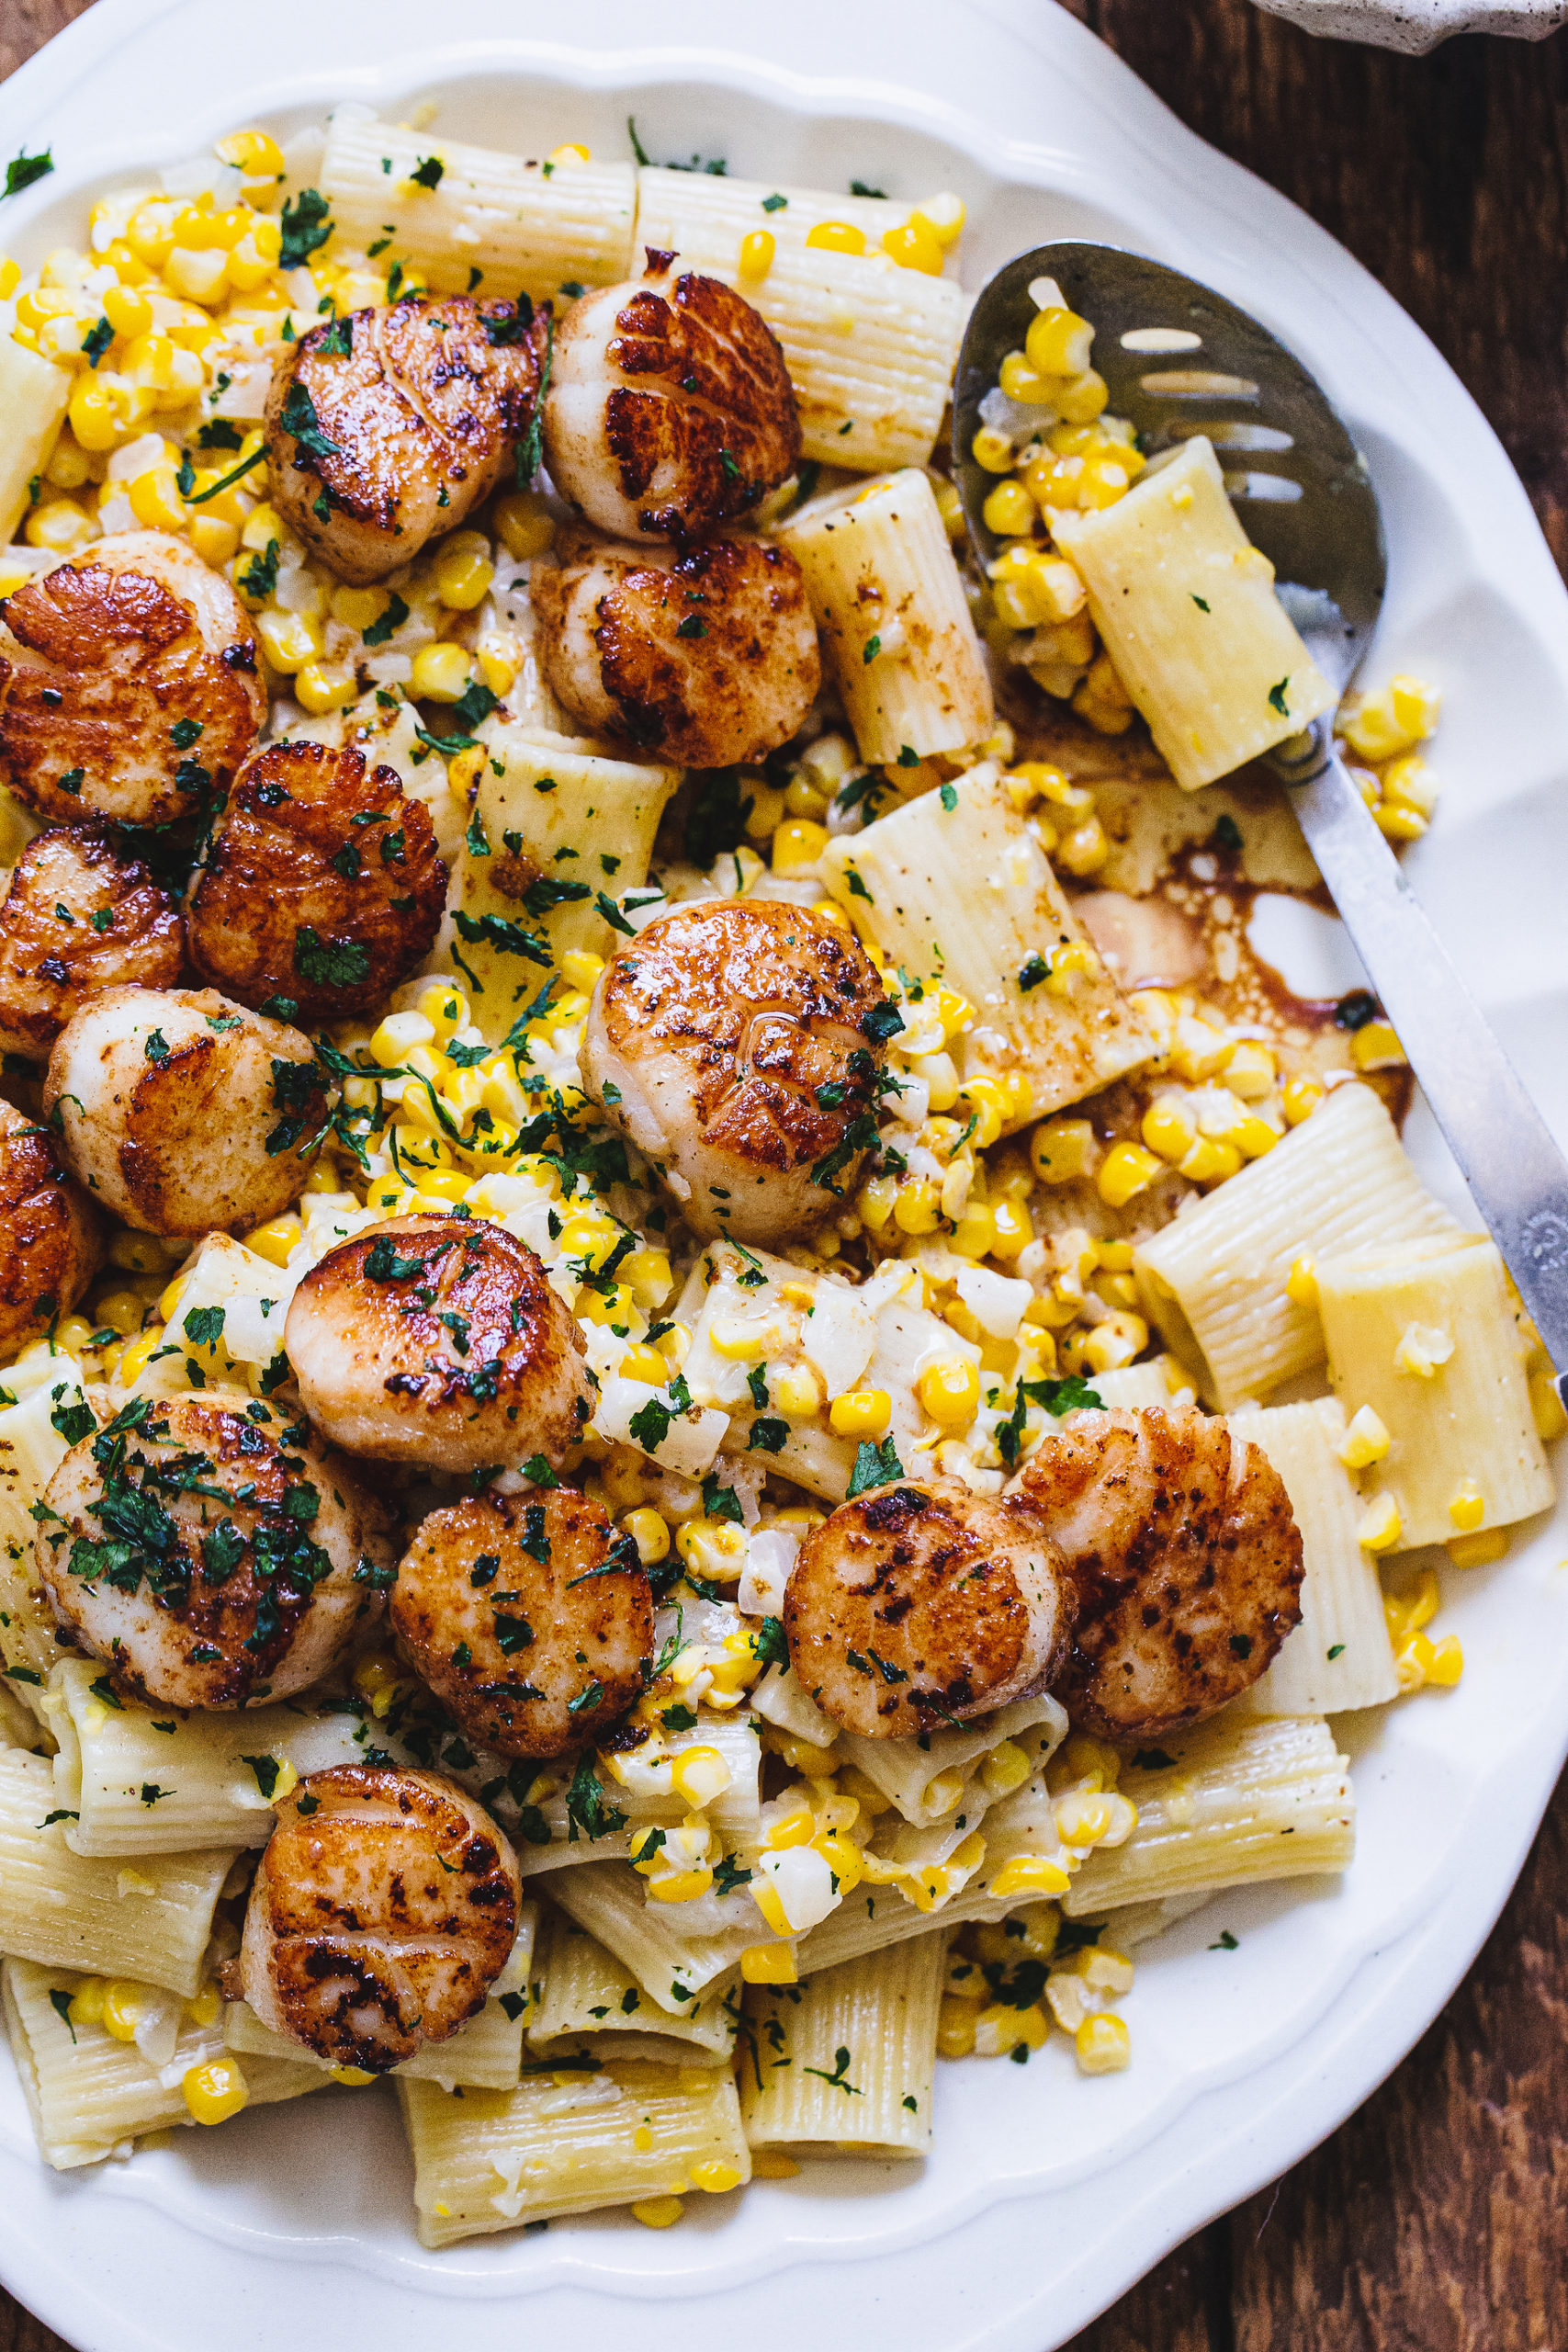 Brown Butter Scallops with Creamy Corn Pasta